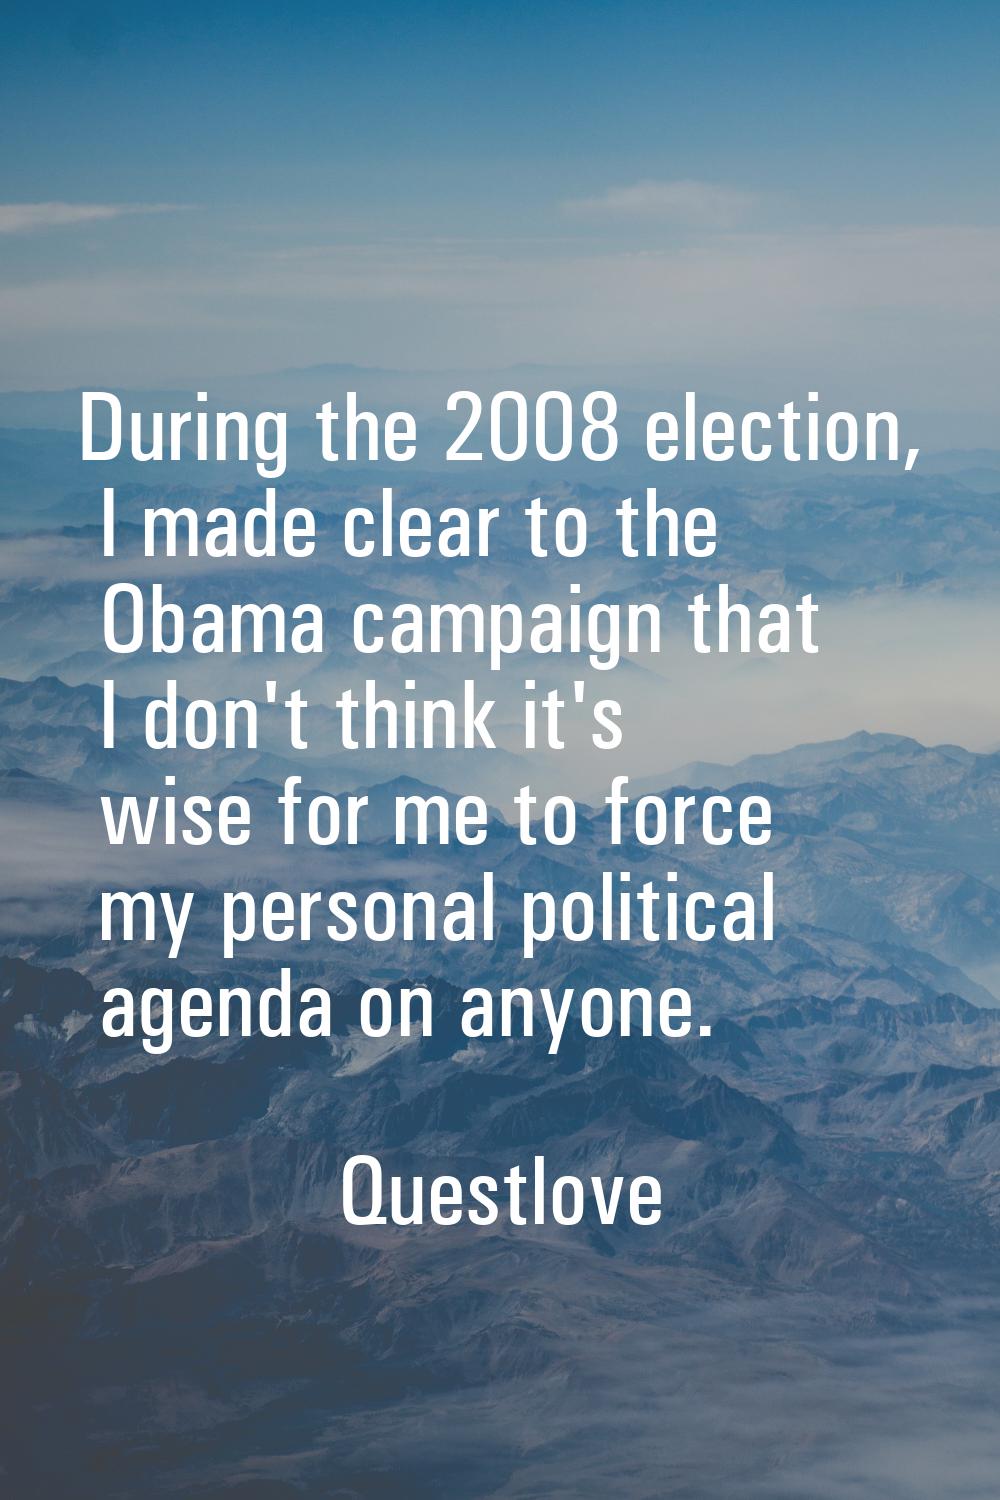 During the 2008 election, I made clear to the Obama campaign that I don't think it's wise for me to